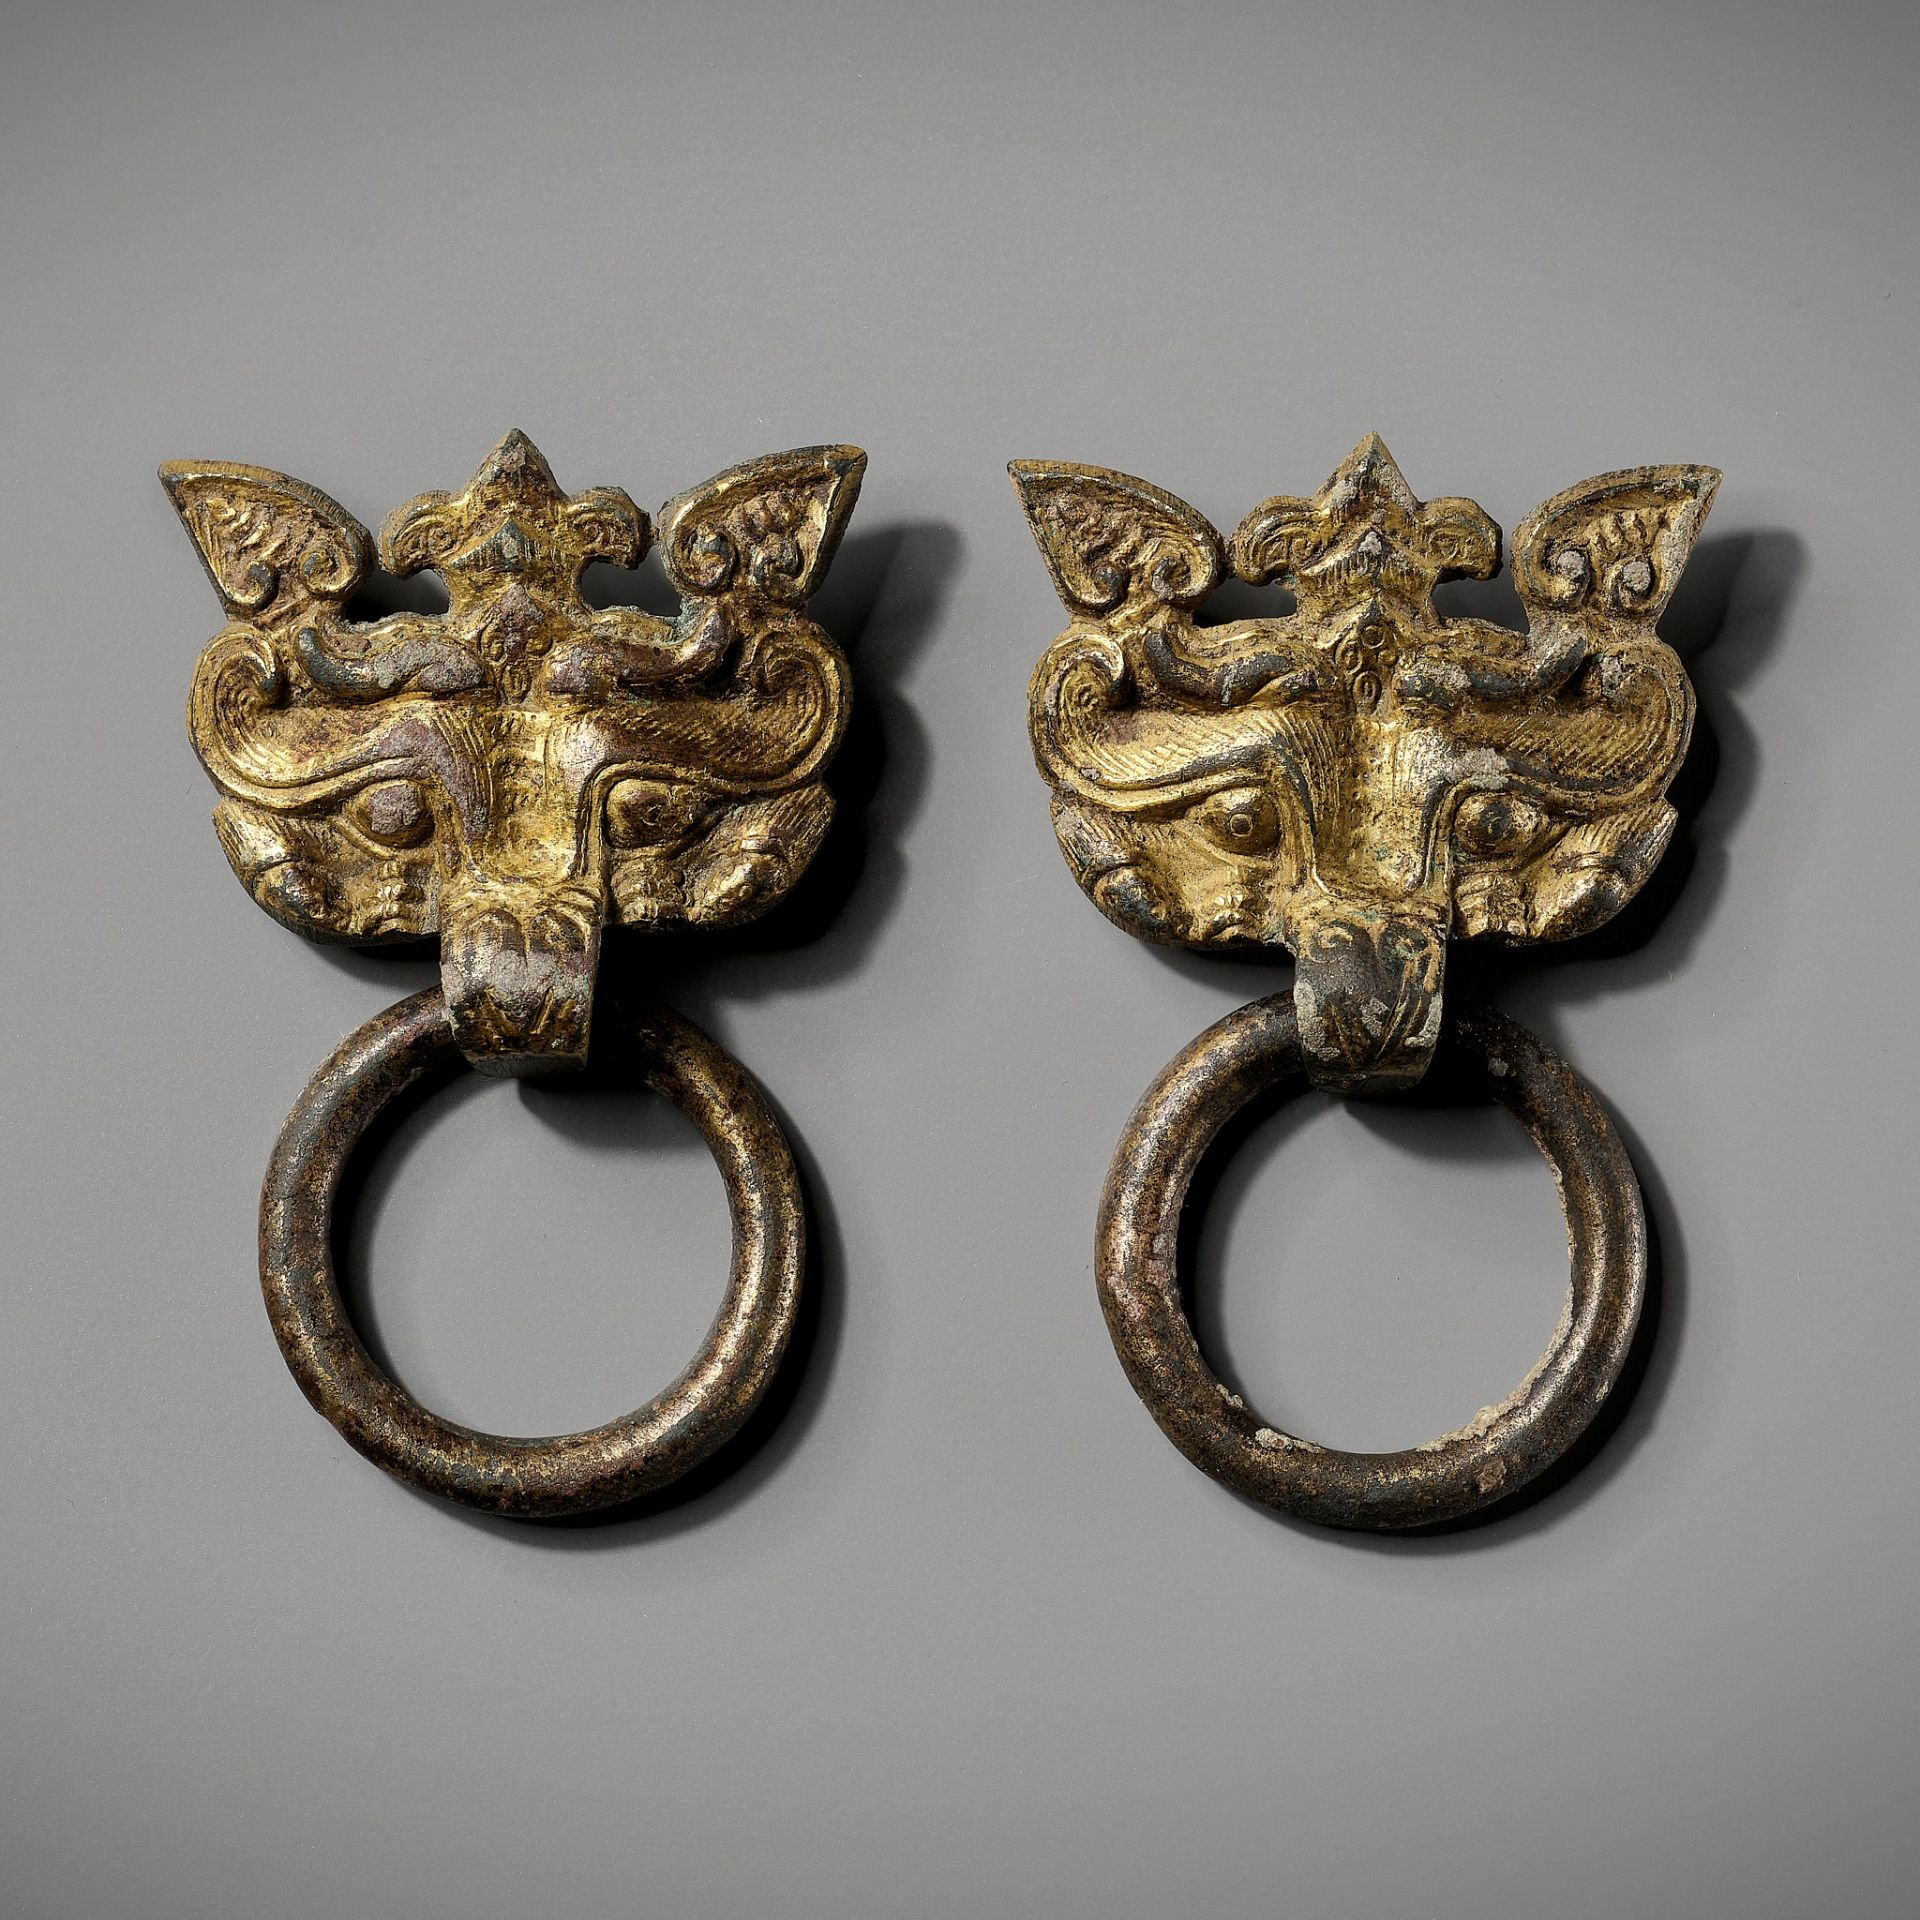 A PAIR OF GILT-BRONZE TAOTIE MASKS WITH RING HANDLES, WARRING STATES TO HAN DYNASTY